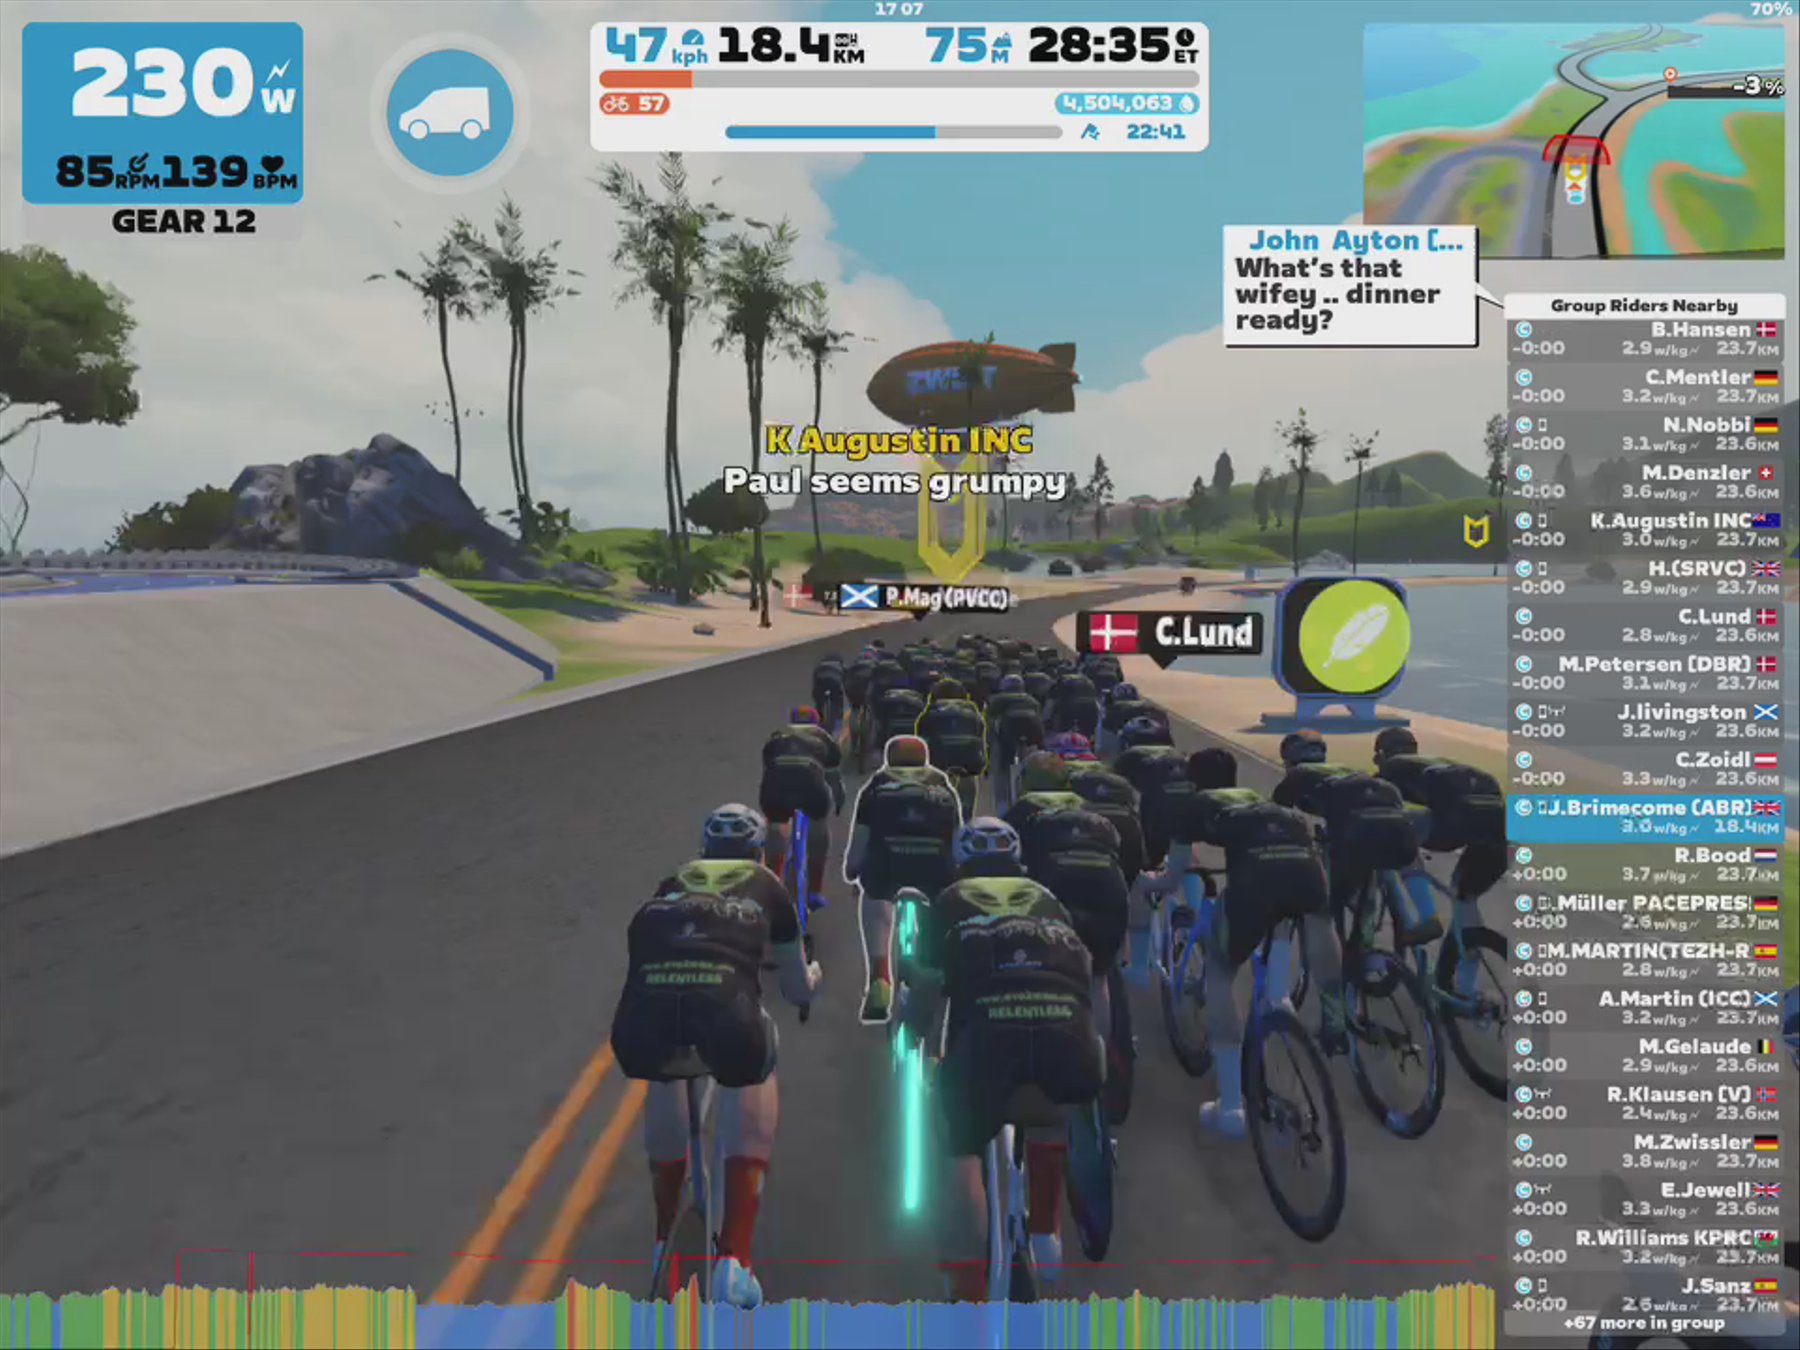 Zwift - Group Ride: INC Steady 1 hour - 5 min Intervals Group Ride (hour avg 2.5 - 3.0) (C) on Watopia's Waistband in Watopia